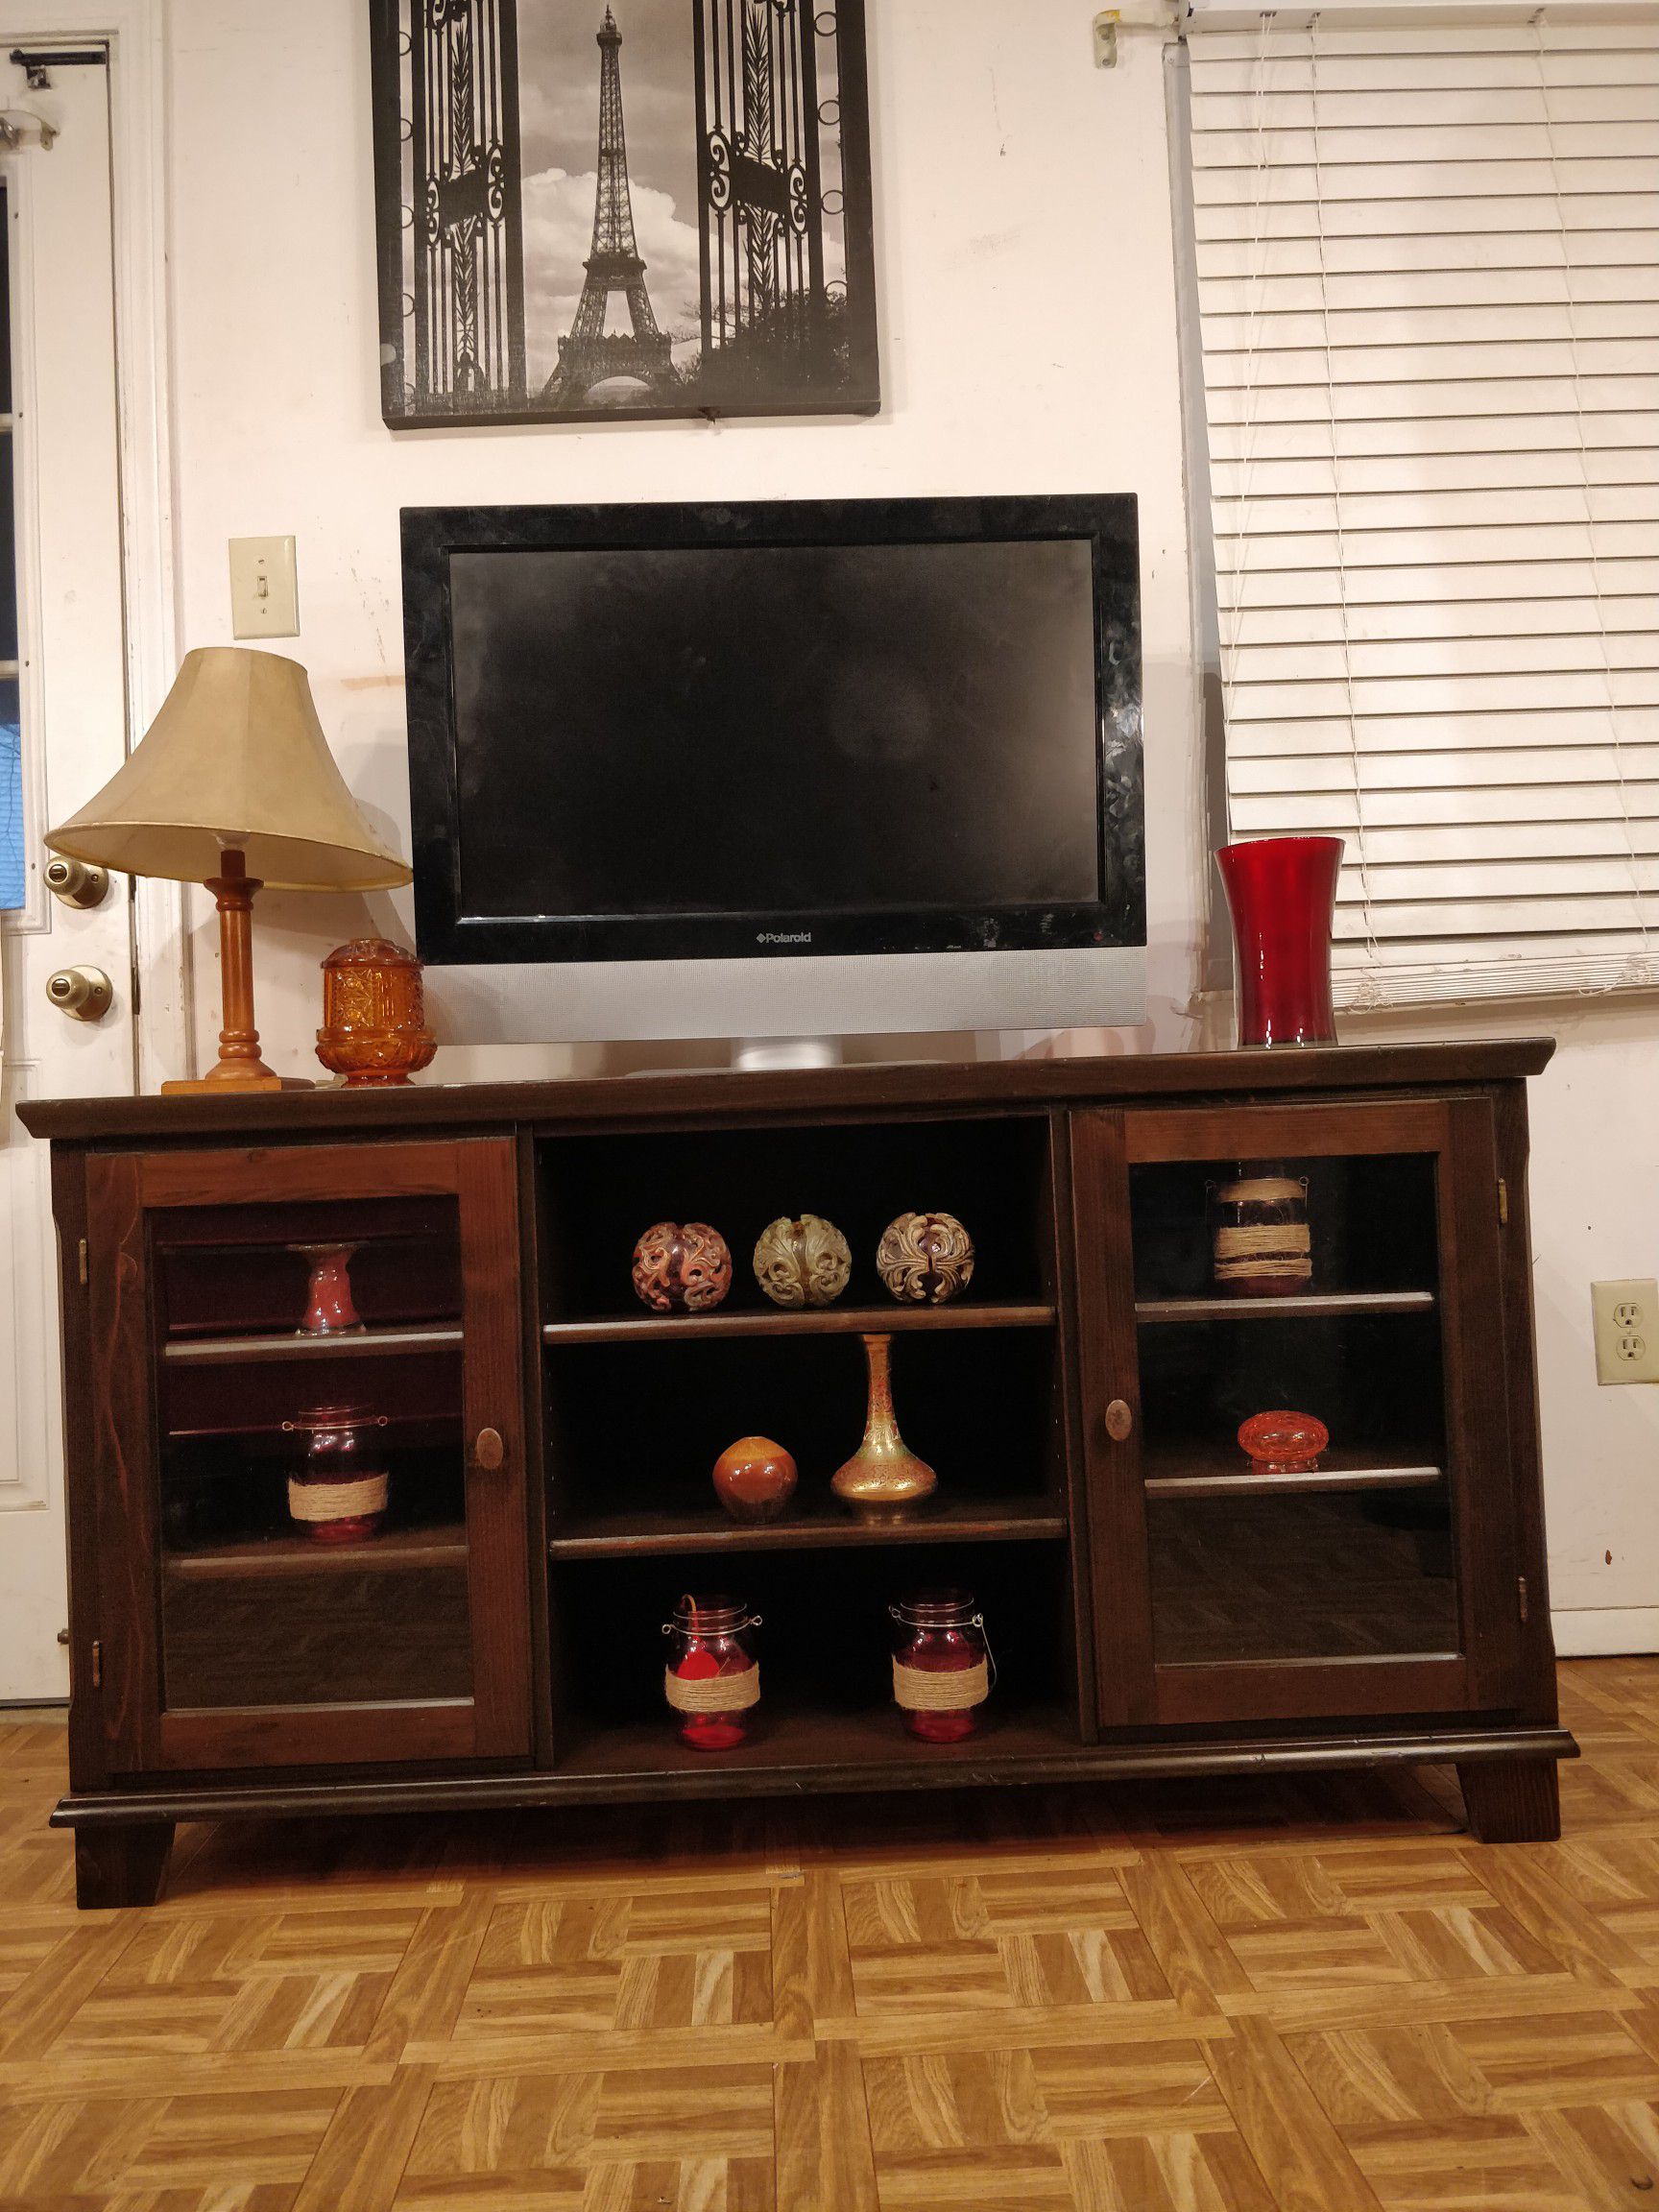 Like new wooden modern big TV stand for big TVs in great condition, you can adjustable all shelves, let me